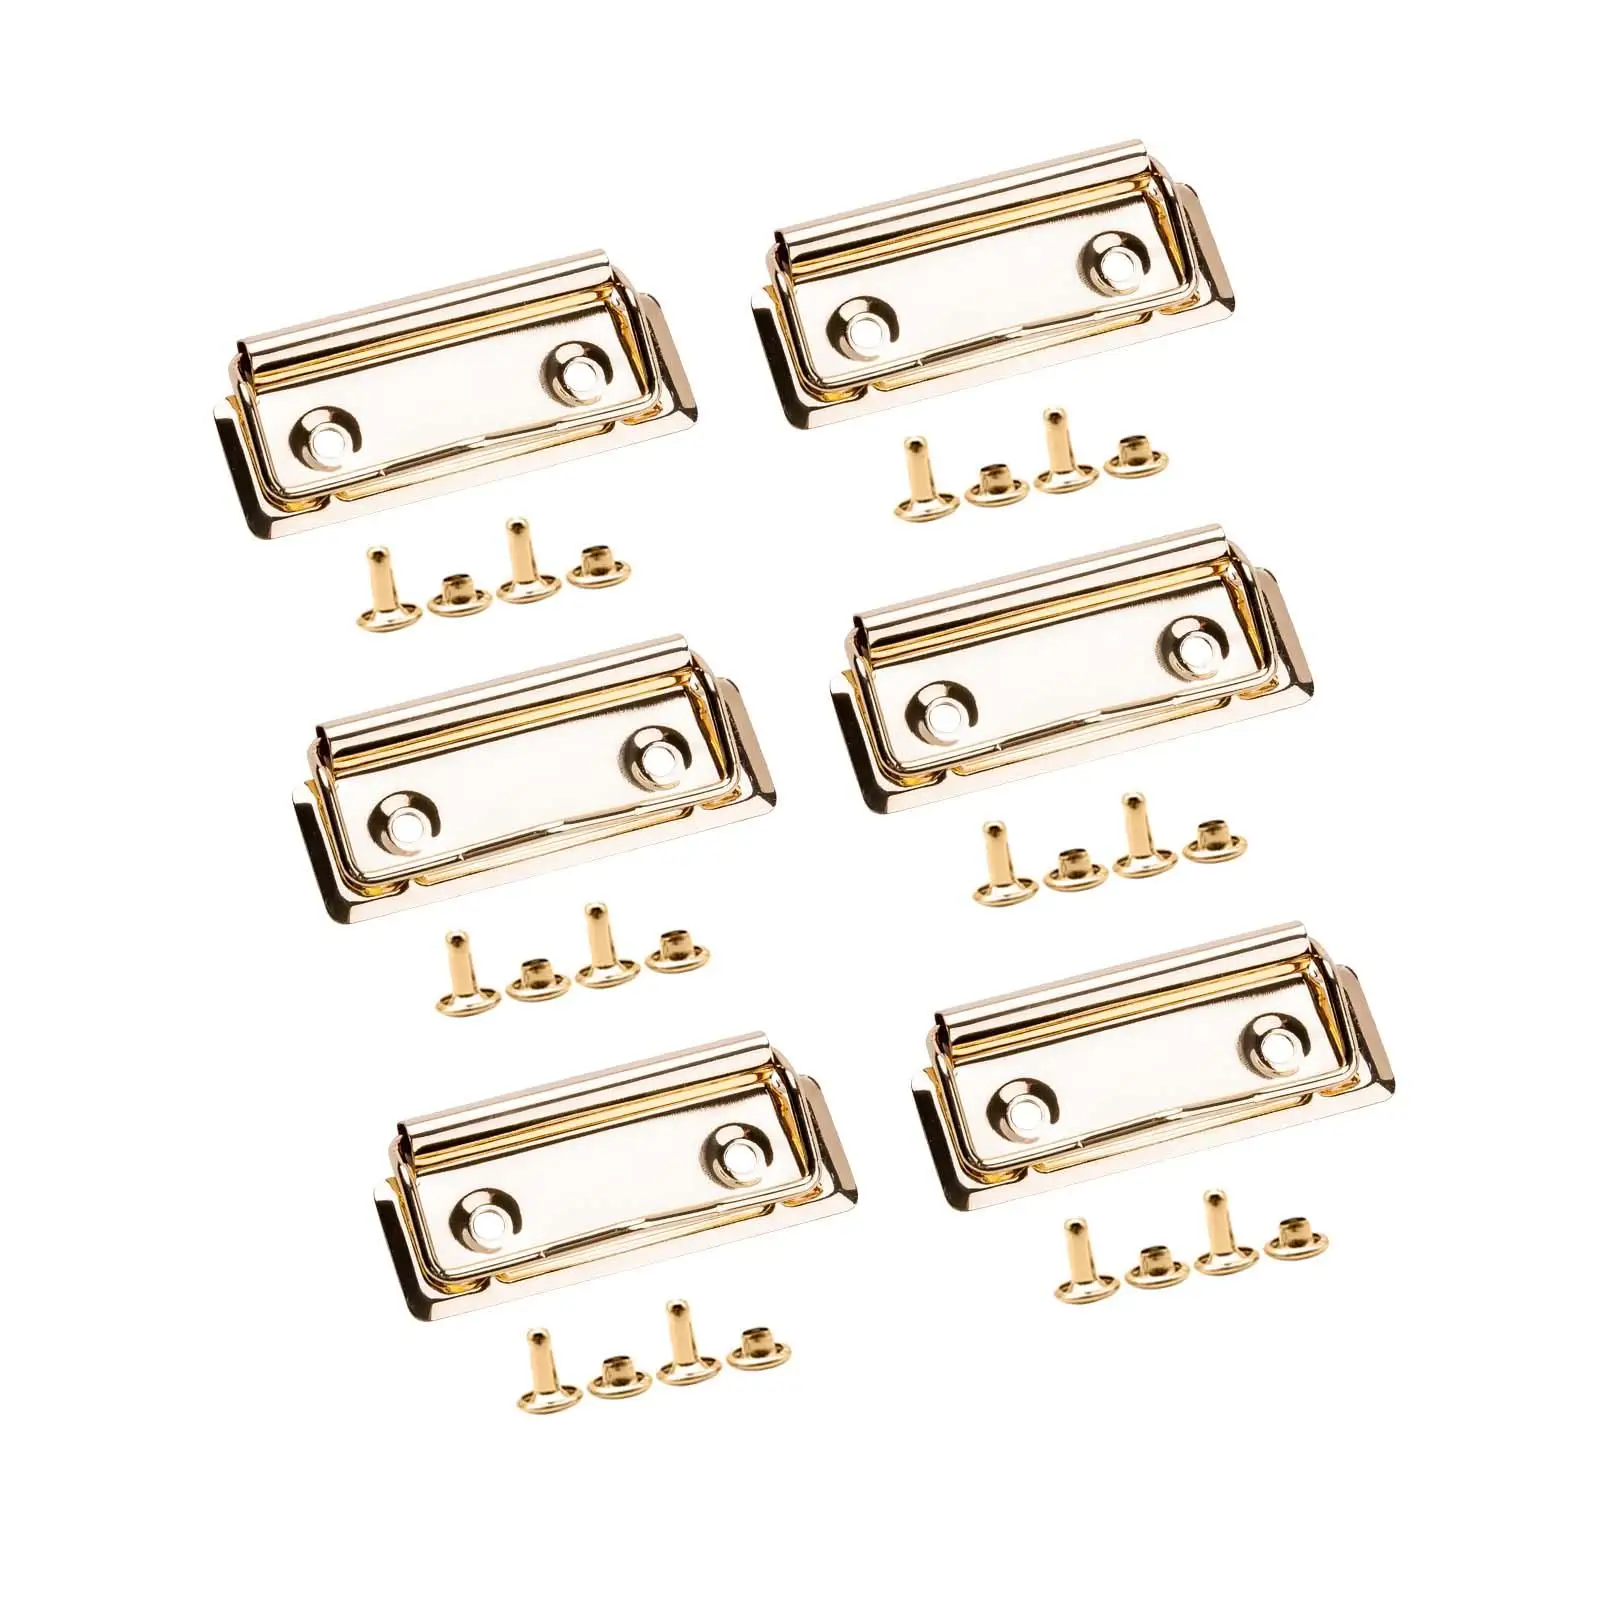 6Pcs Clips for Clipboard Hardware Heavy Duty Lightweight Iron Low Profile Clipboard Clips for Business Stationery Supplies Class